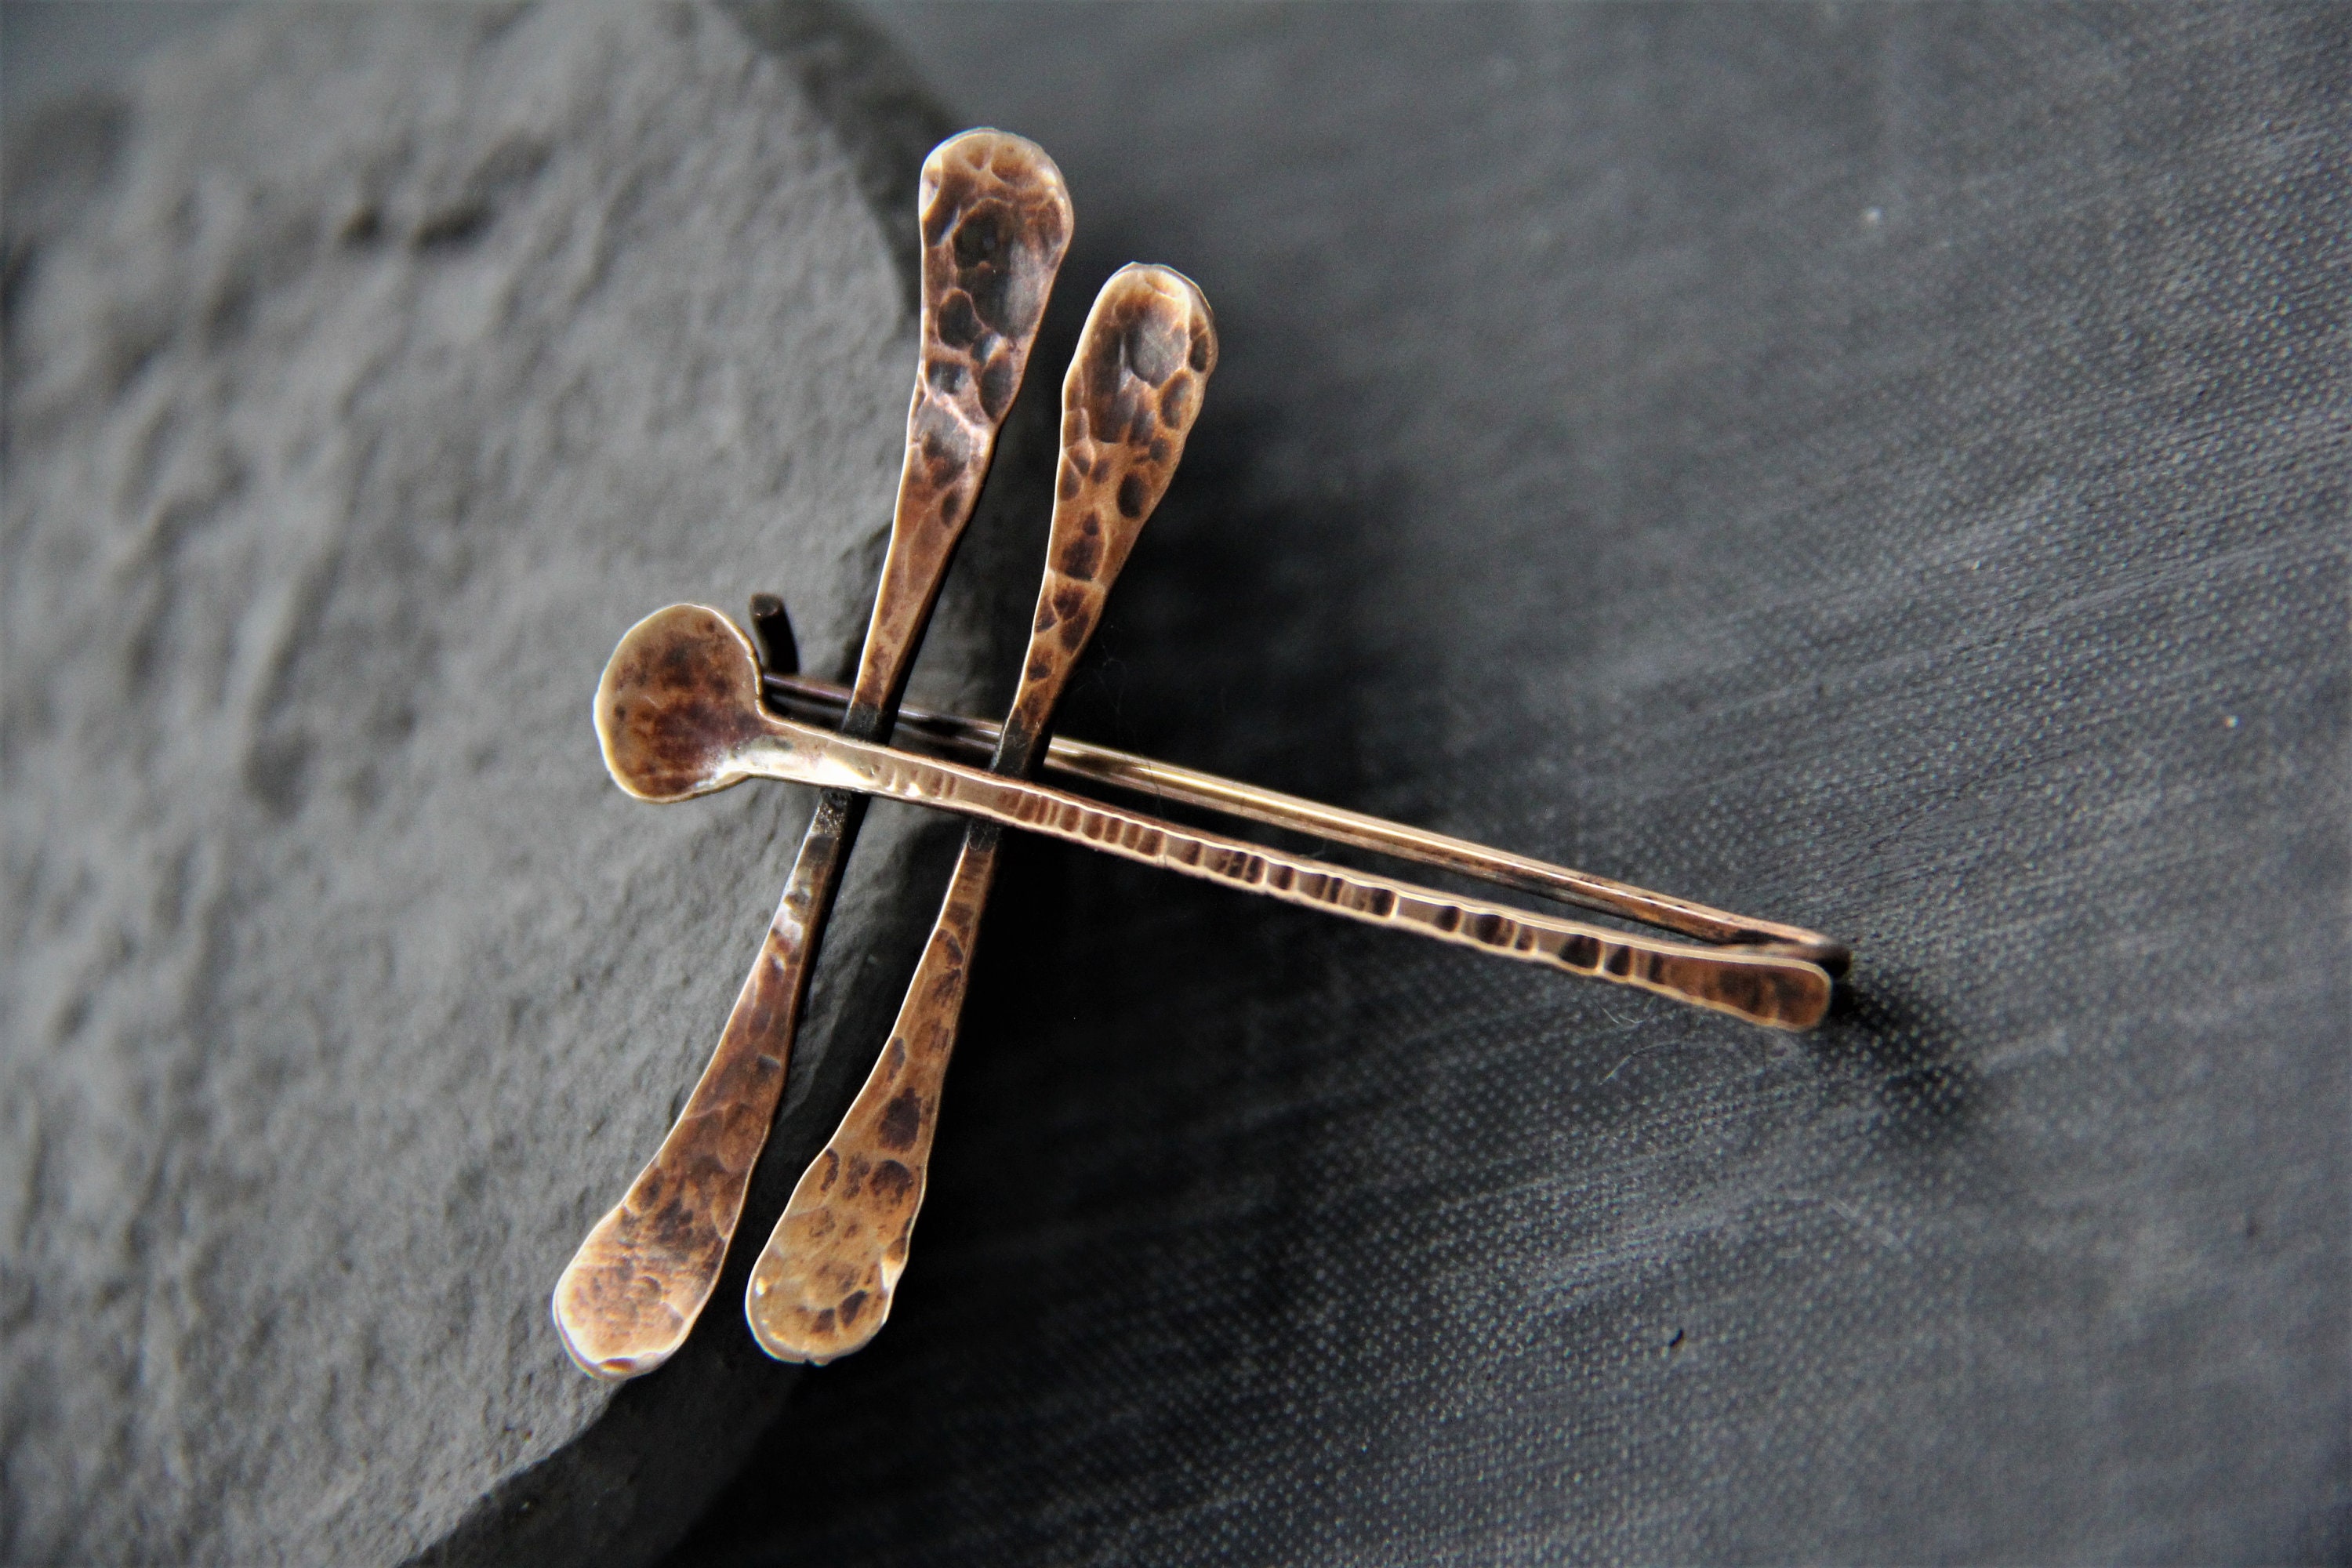 Keepandcherish Bronze Dragonfly Shawl Pin, Scarf Pin, Brooch, Fibula, Hammered, Textured. Rustic, Insects, Woodland, Nature Lover, Artisan Jewelry